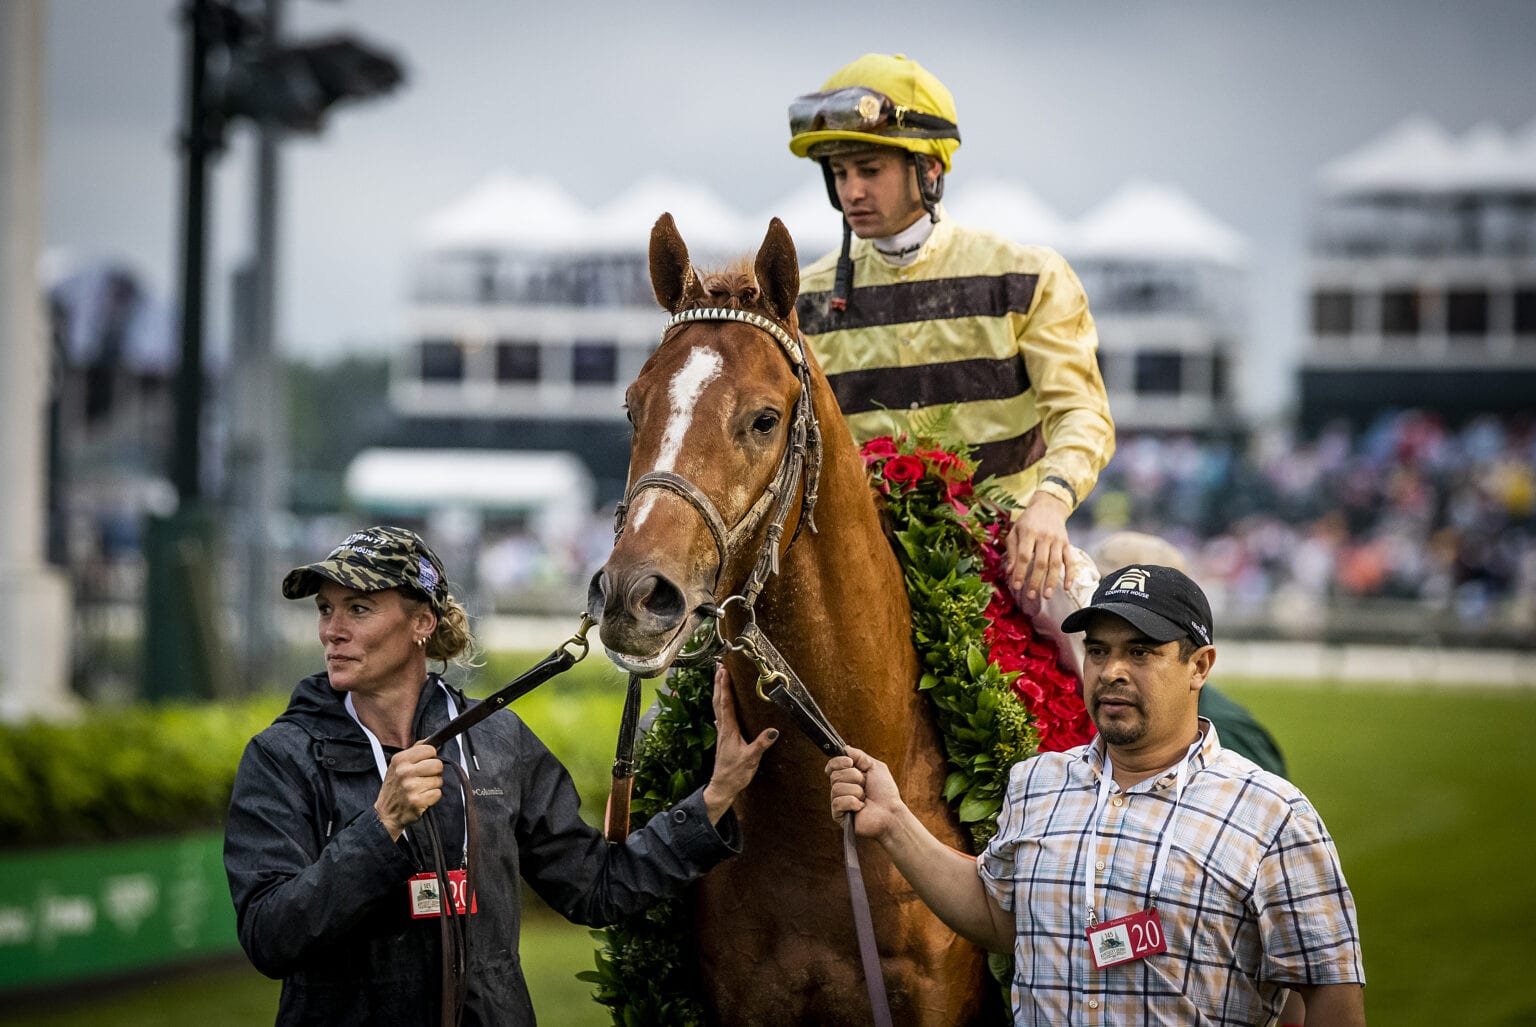 Kentucky Derby winner Country House to stand at Darby Dan Farm – Darby ...